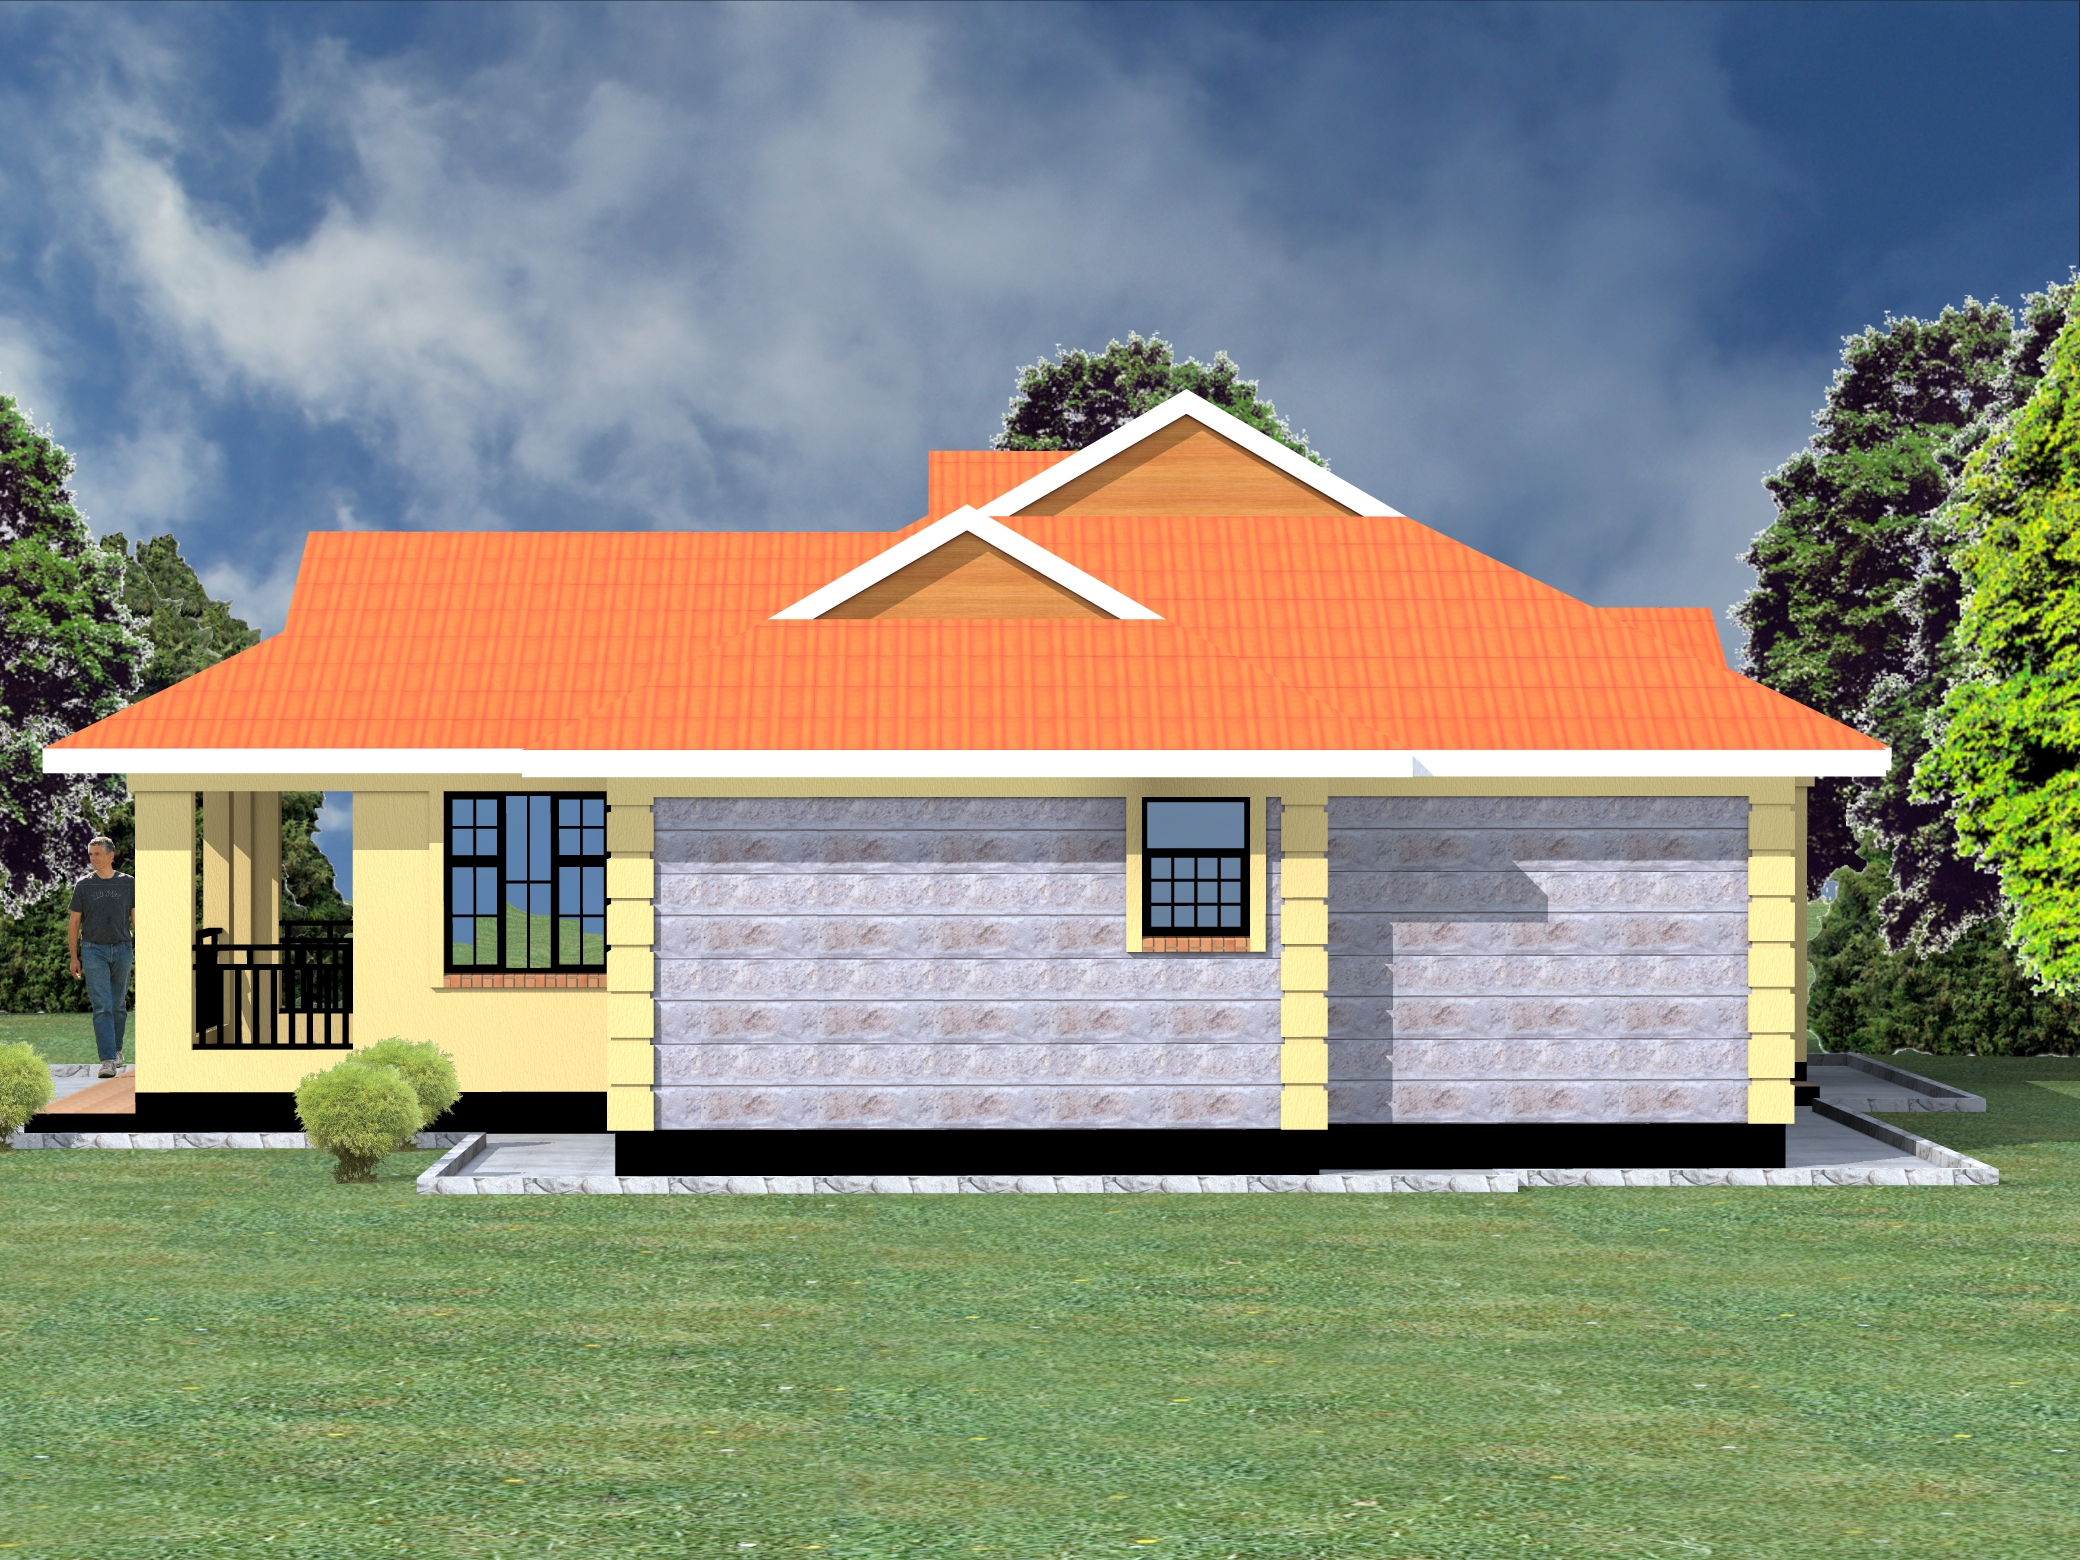 SIMPLE 3 BEDROOM BUNGALOW PLAN. CHECK HERE>>